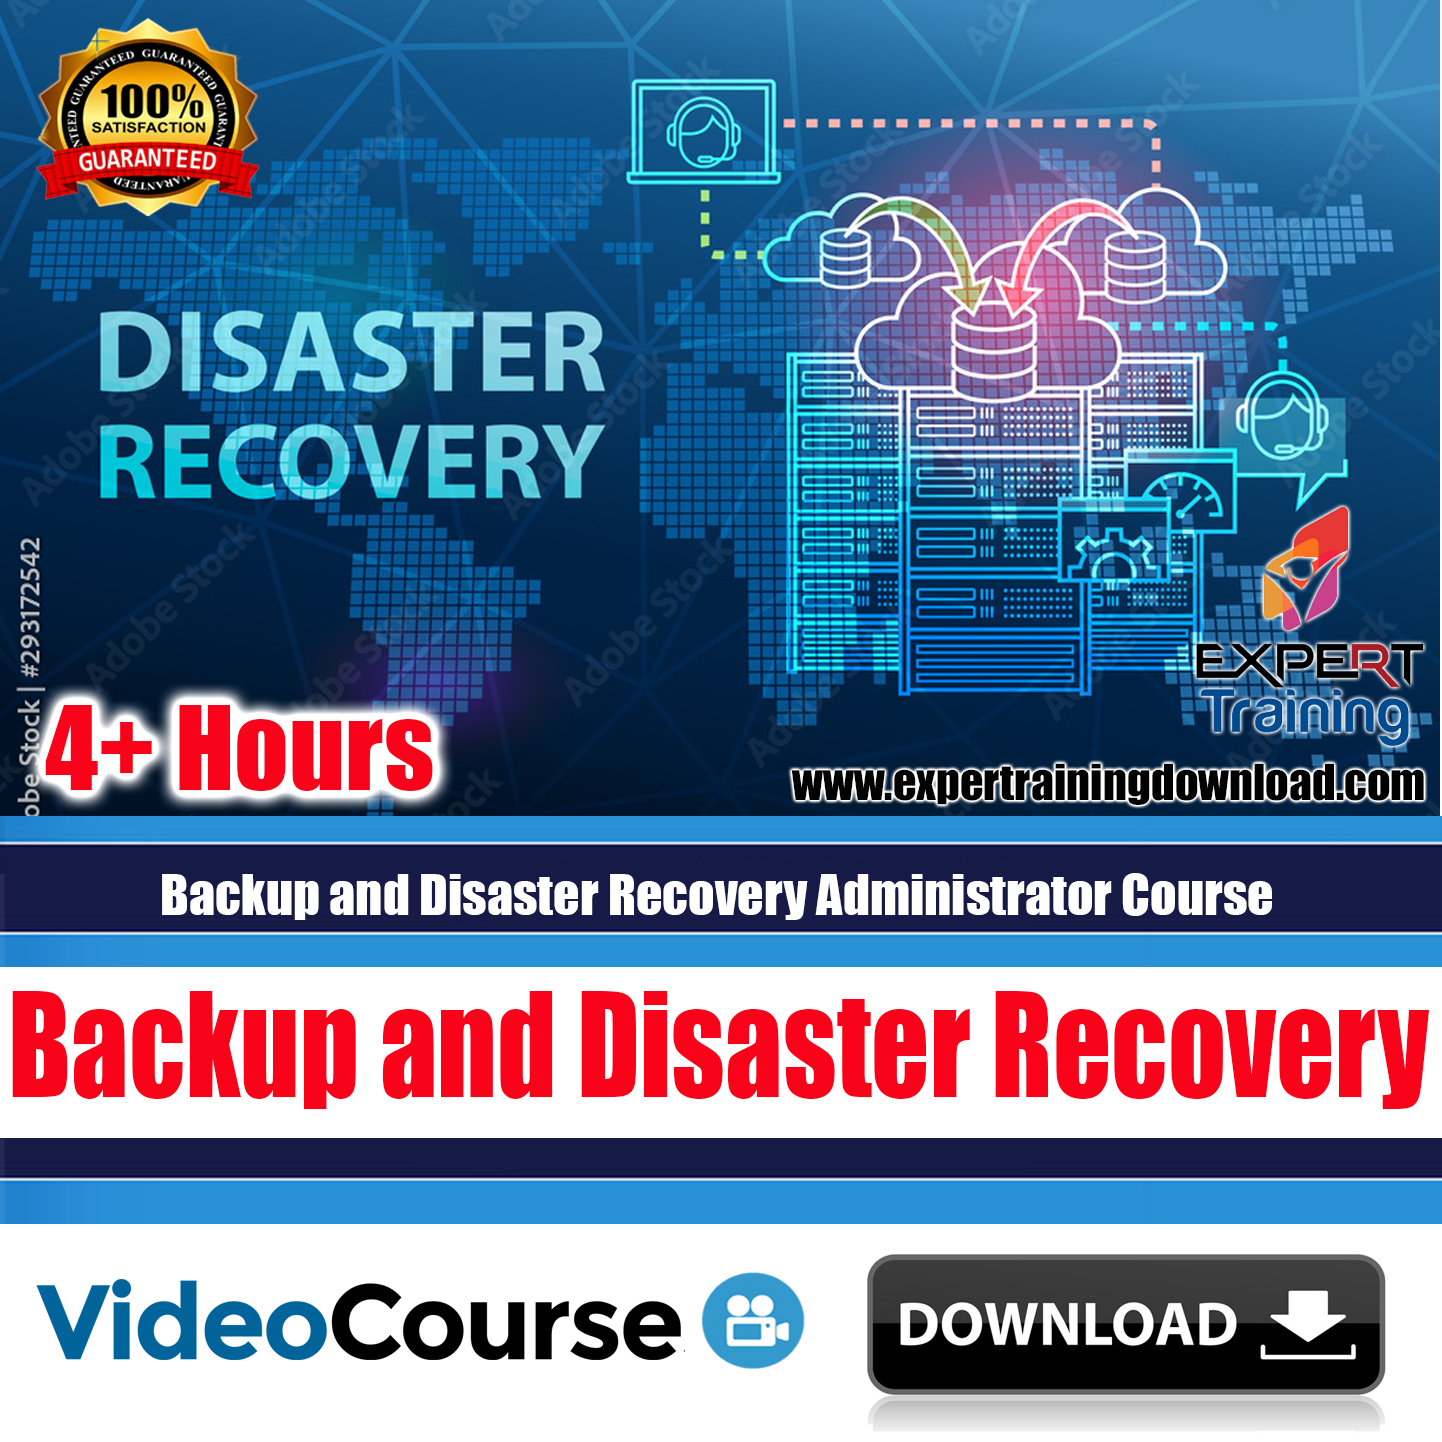 Backup and Disaster Recovery Administrator Course